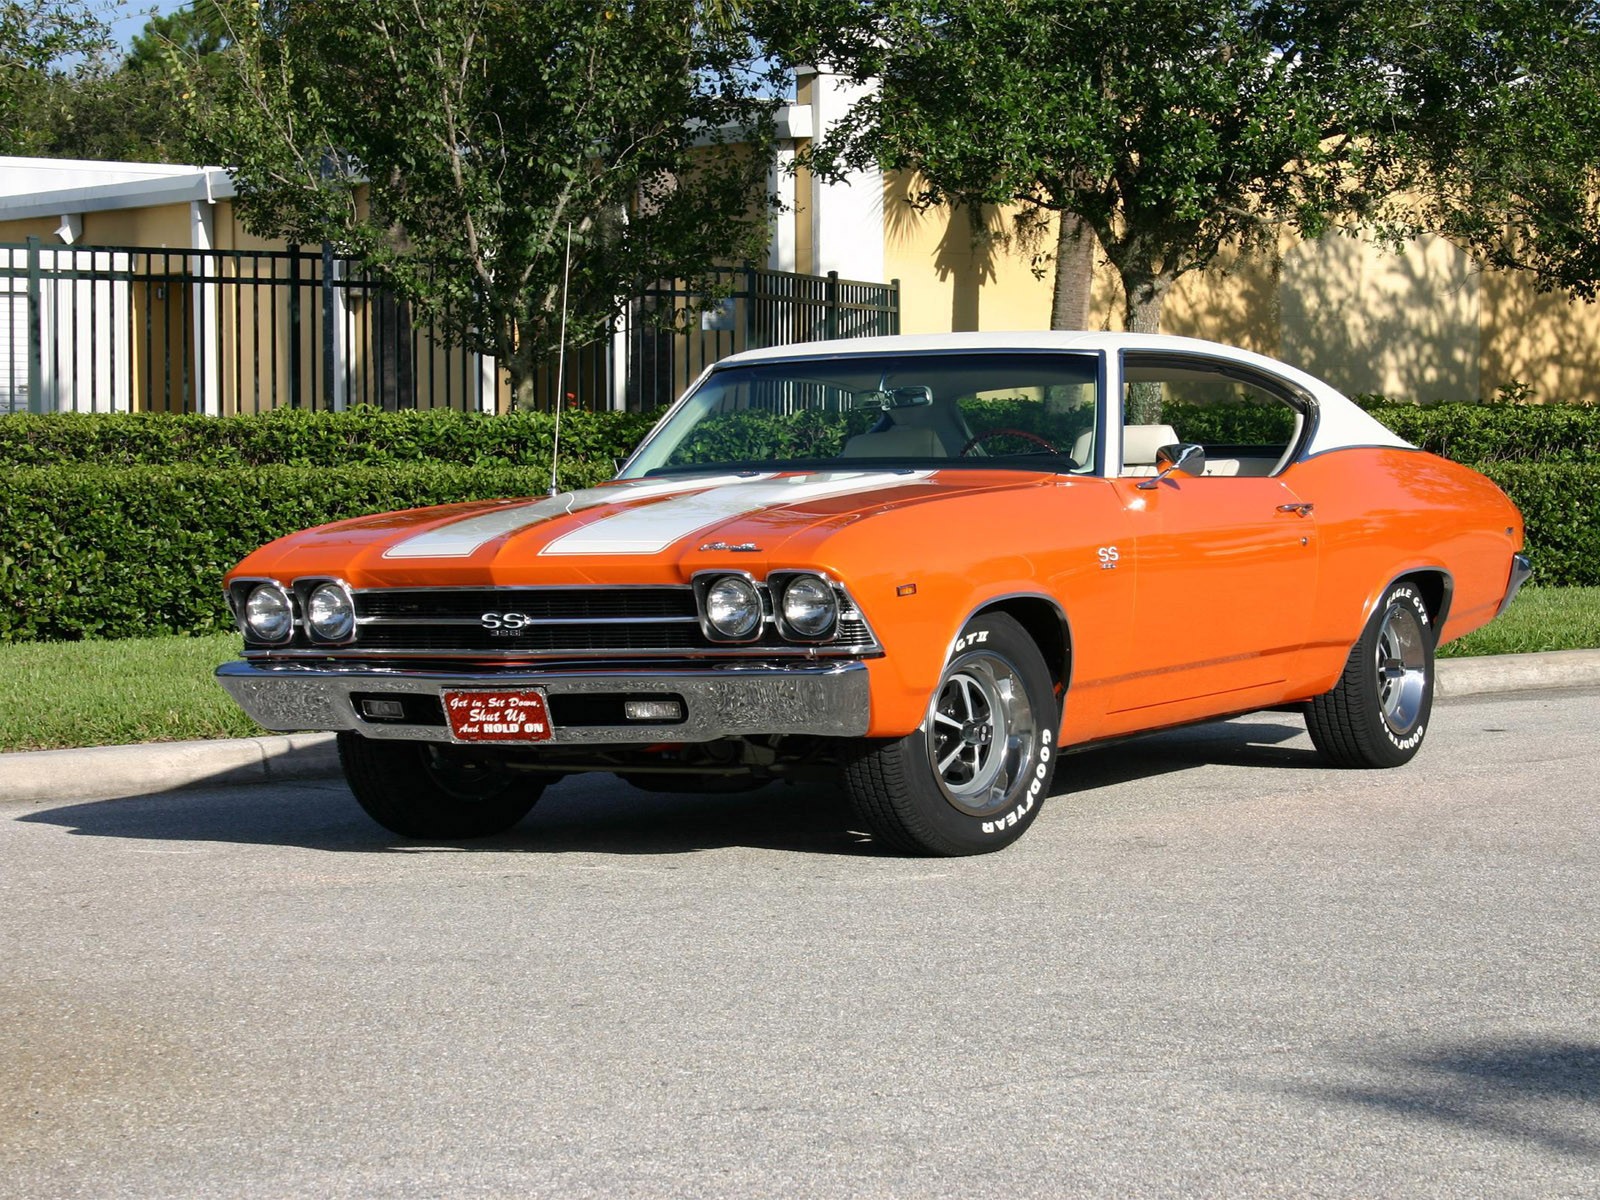 1969 Chevrolet Chevelle SS Wallpaper and Background Image | 1600x1200